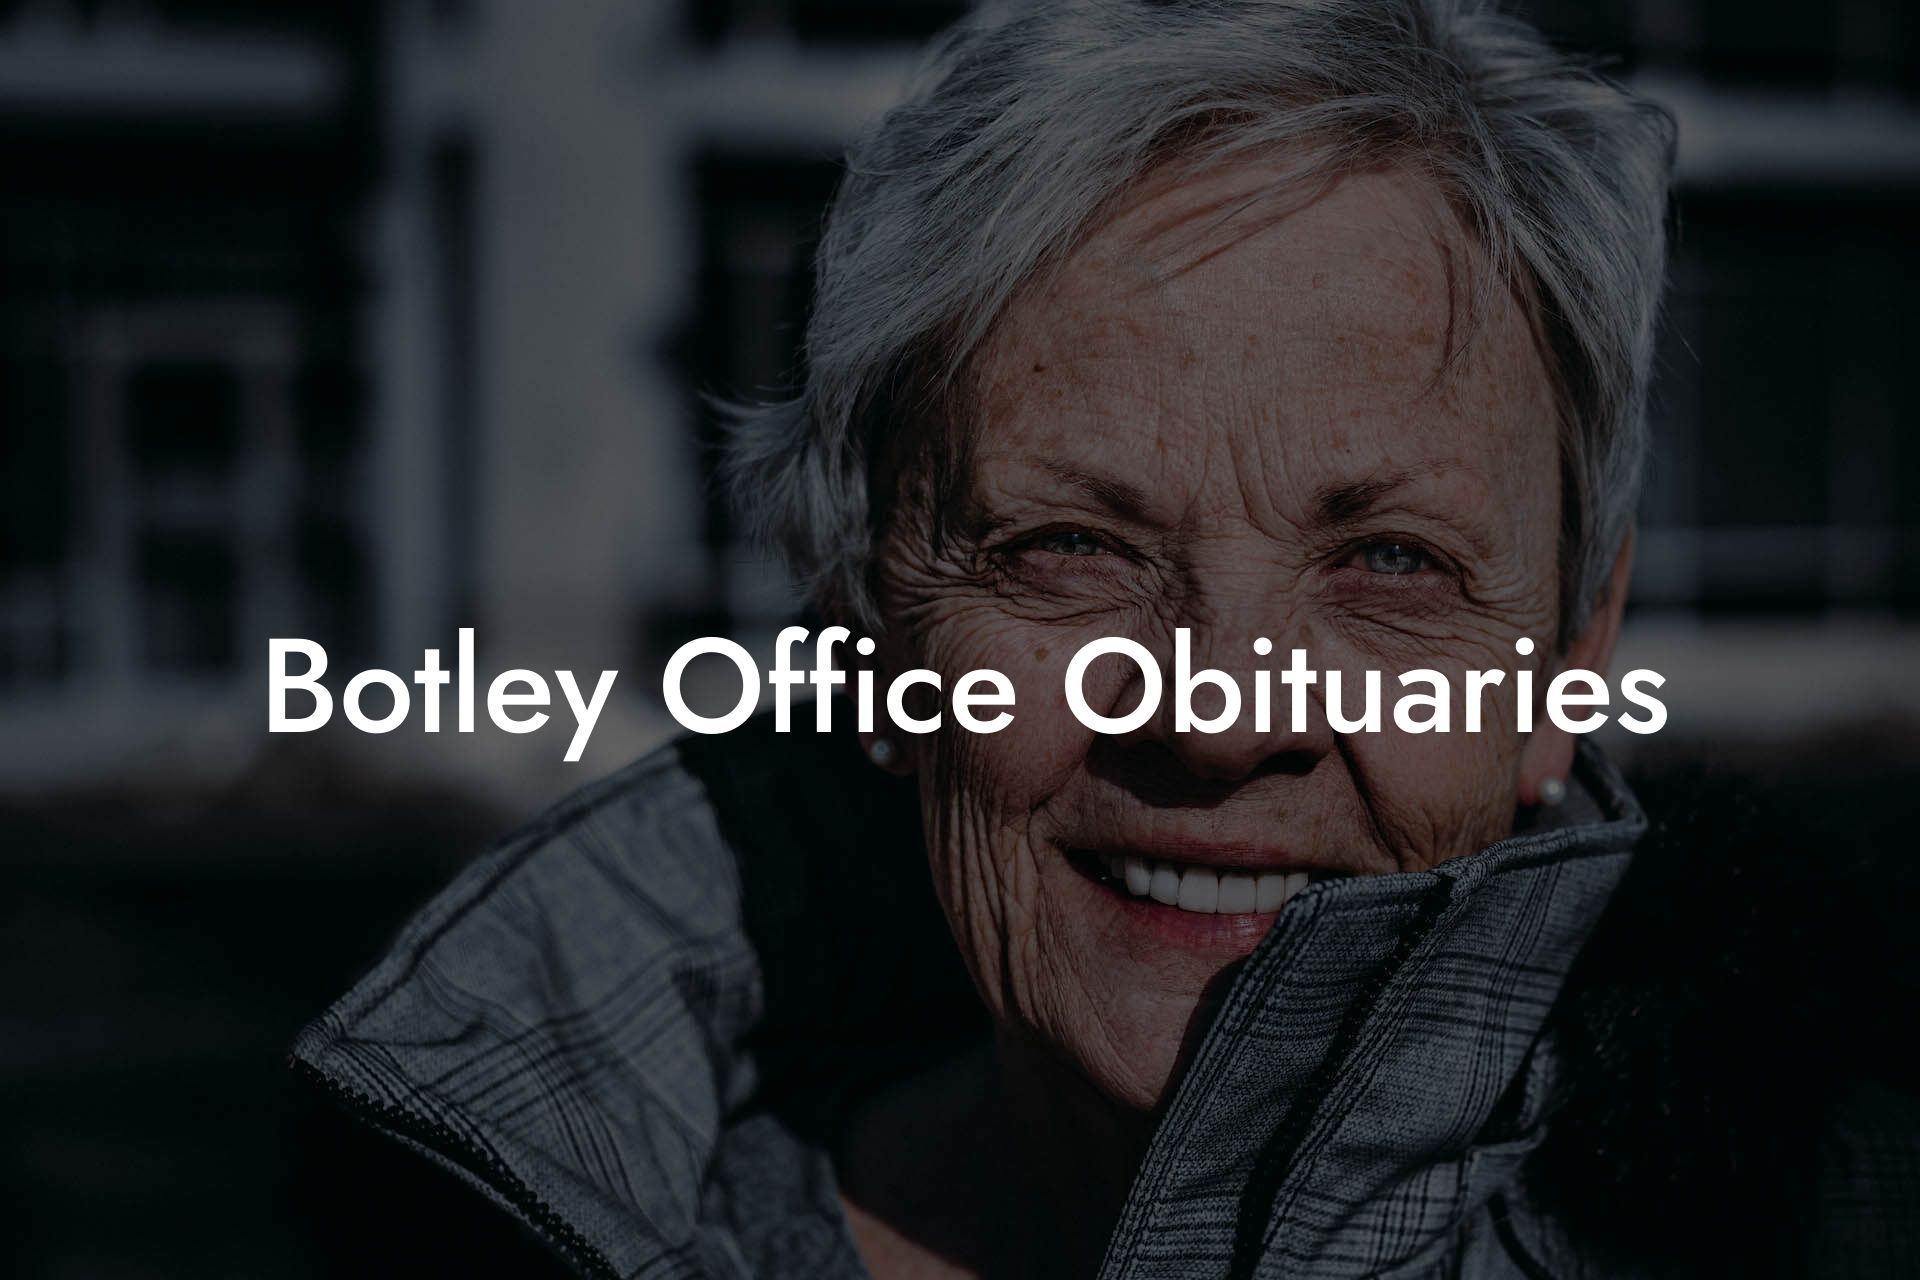 Botley Office Obituaries